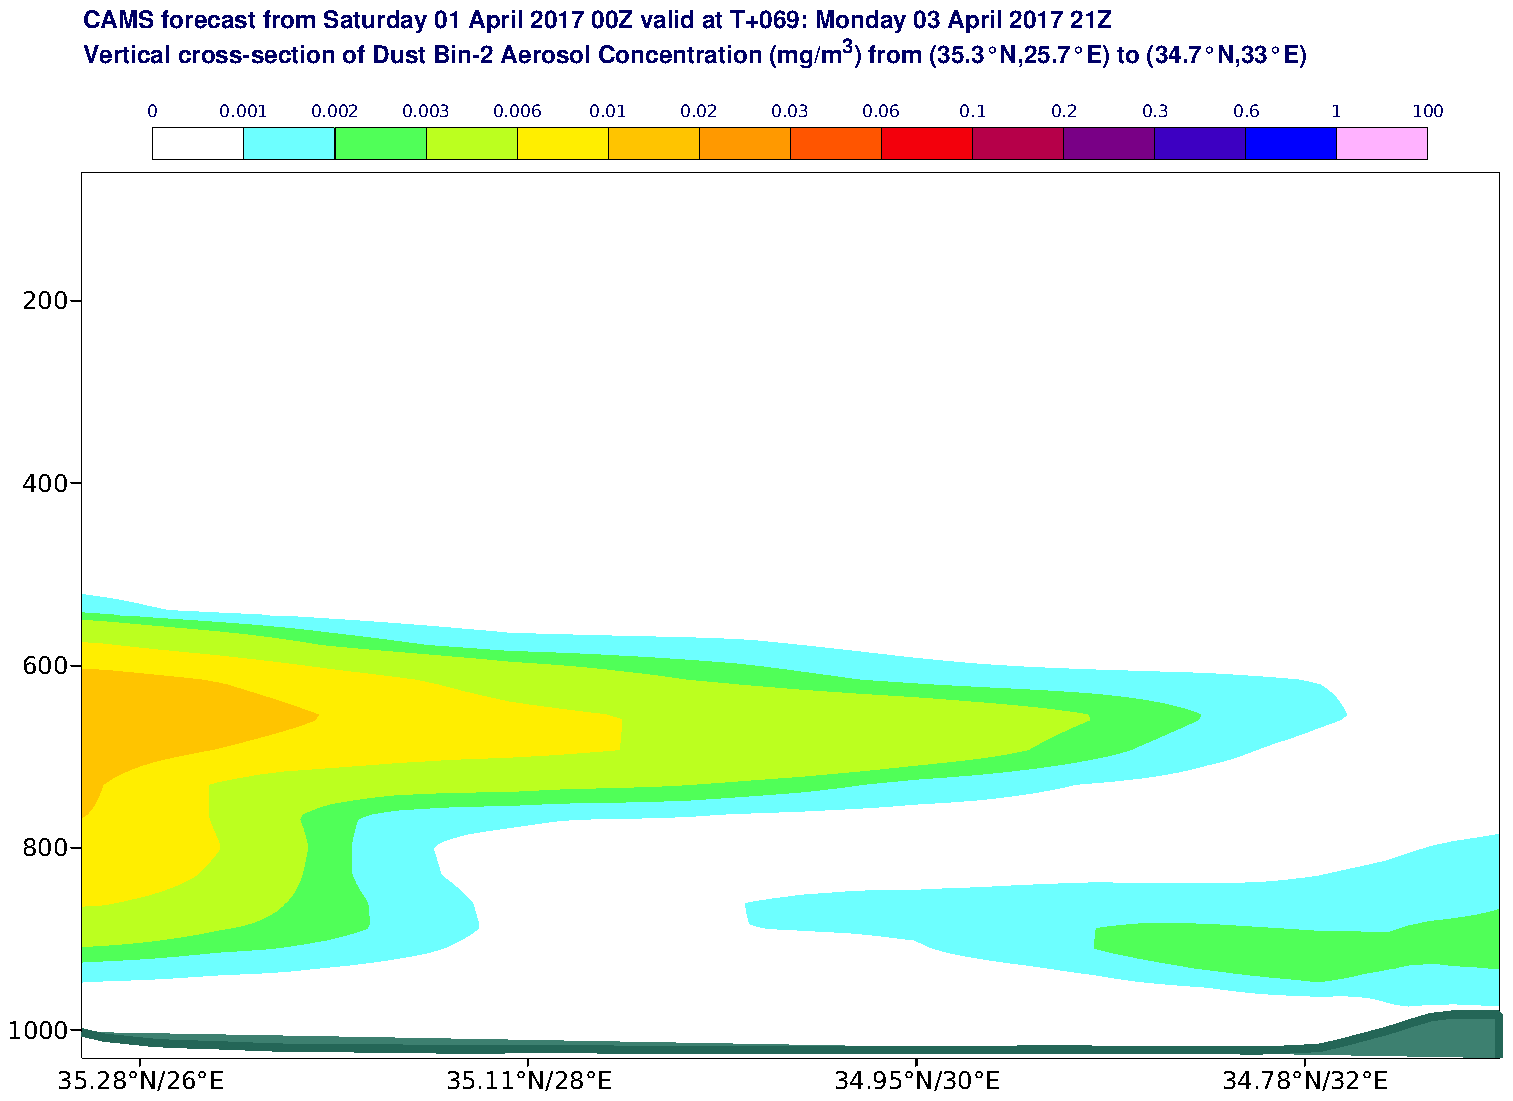 Vertical cross-section of Dust Bin-2 Aerosol Concentration (mg/m3) valid at T69 - 2017-04-03 21:00